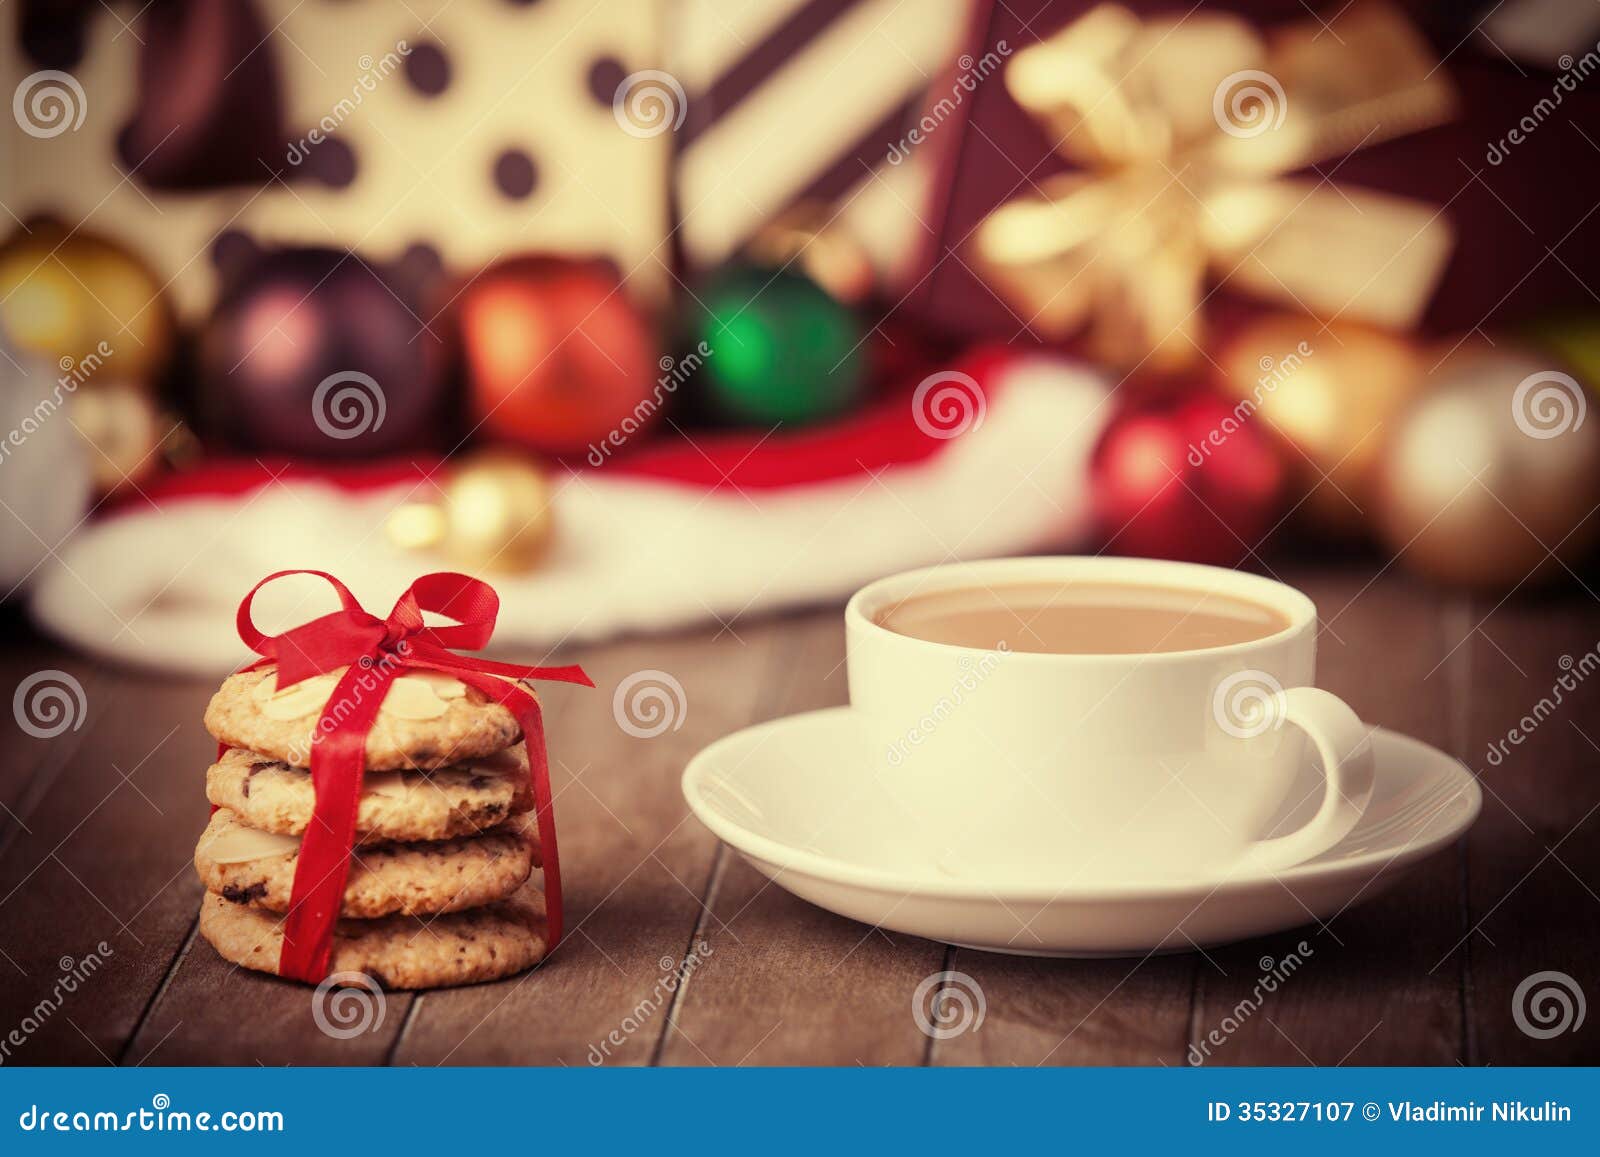 cookies-cup-coffee-christmas-gifts-background-35327107.jpg